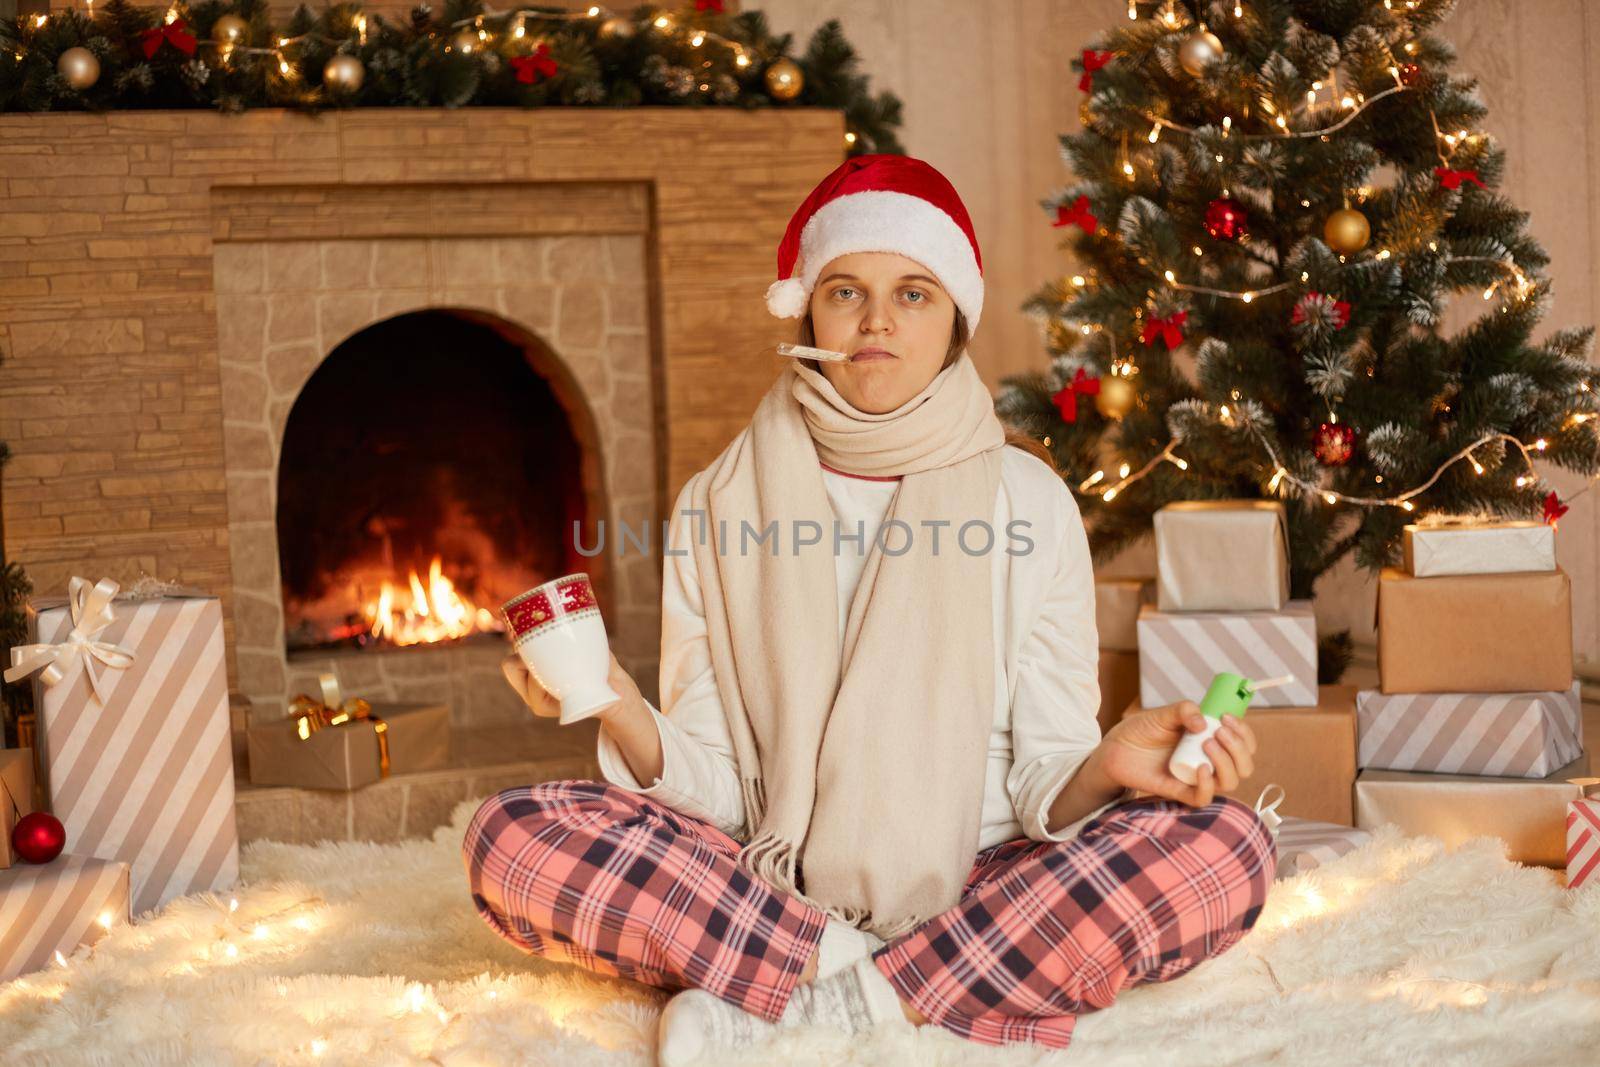 Sad sick girl with thermometer in mouth on Christmas holiday drinking tea and holding sore throat spray, looking at camera with unwell facial expression, wearing casual clothing, wrapper scarf and hat